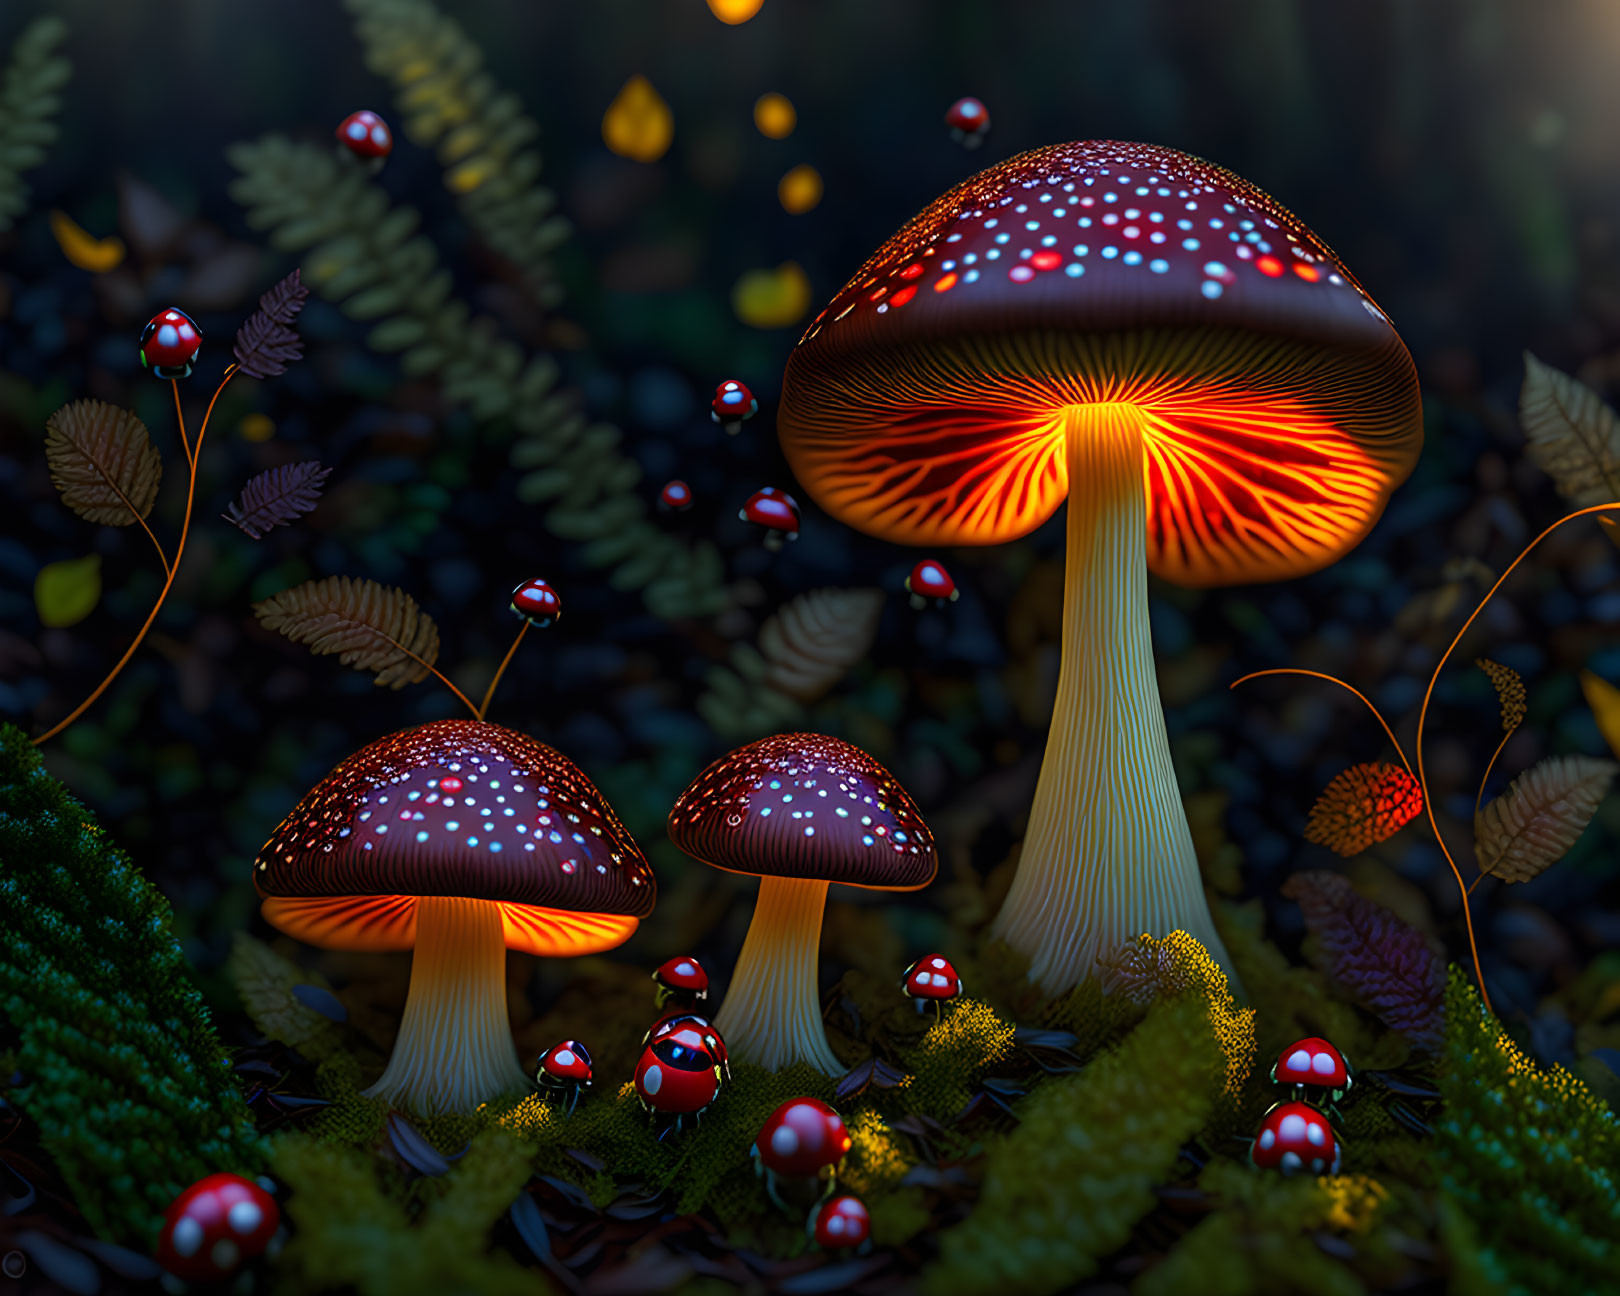 By the light of the fungi